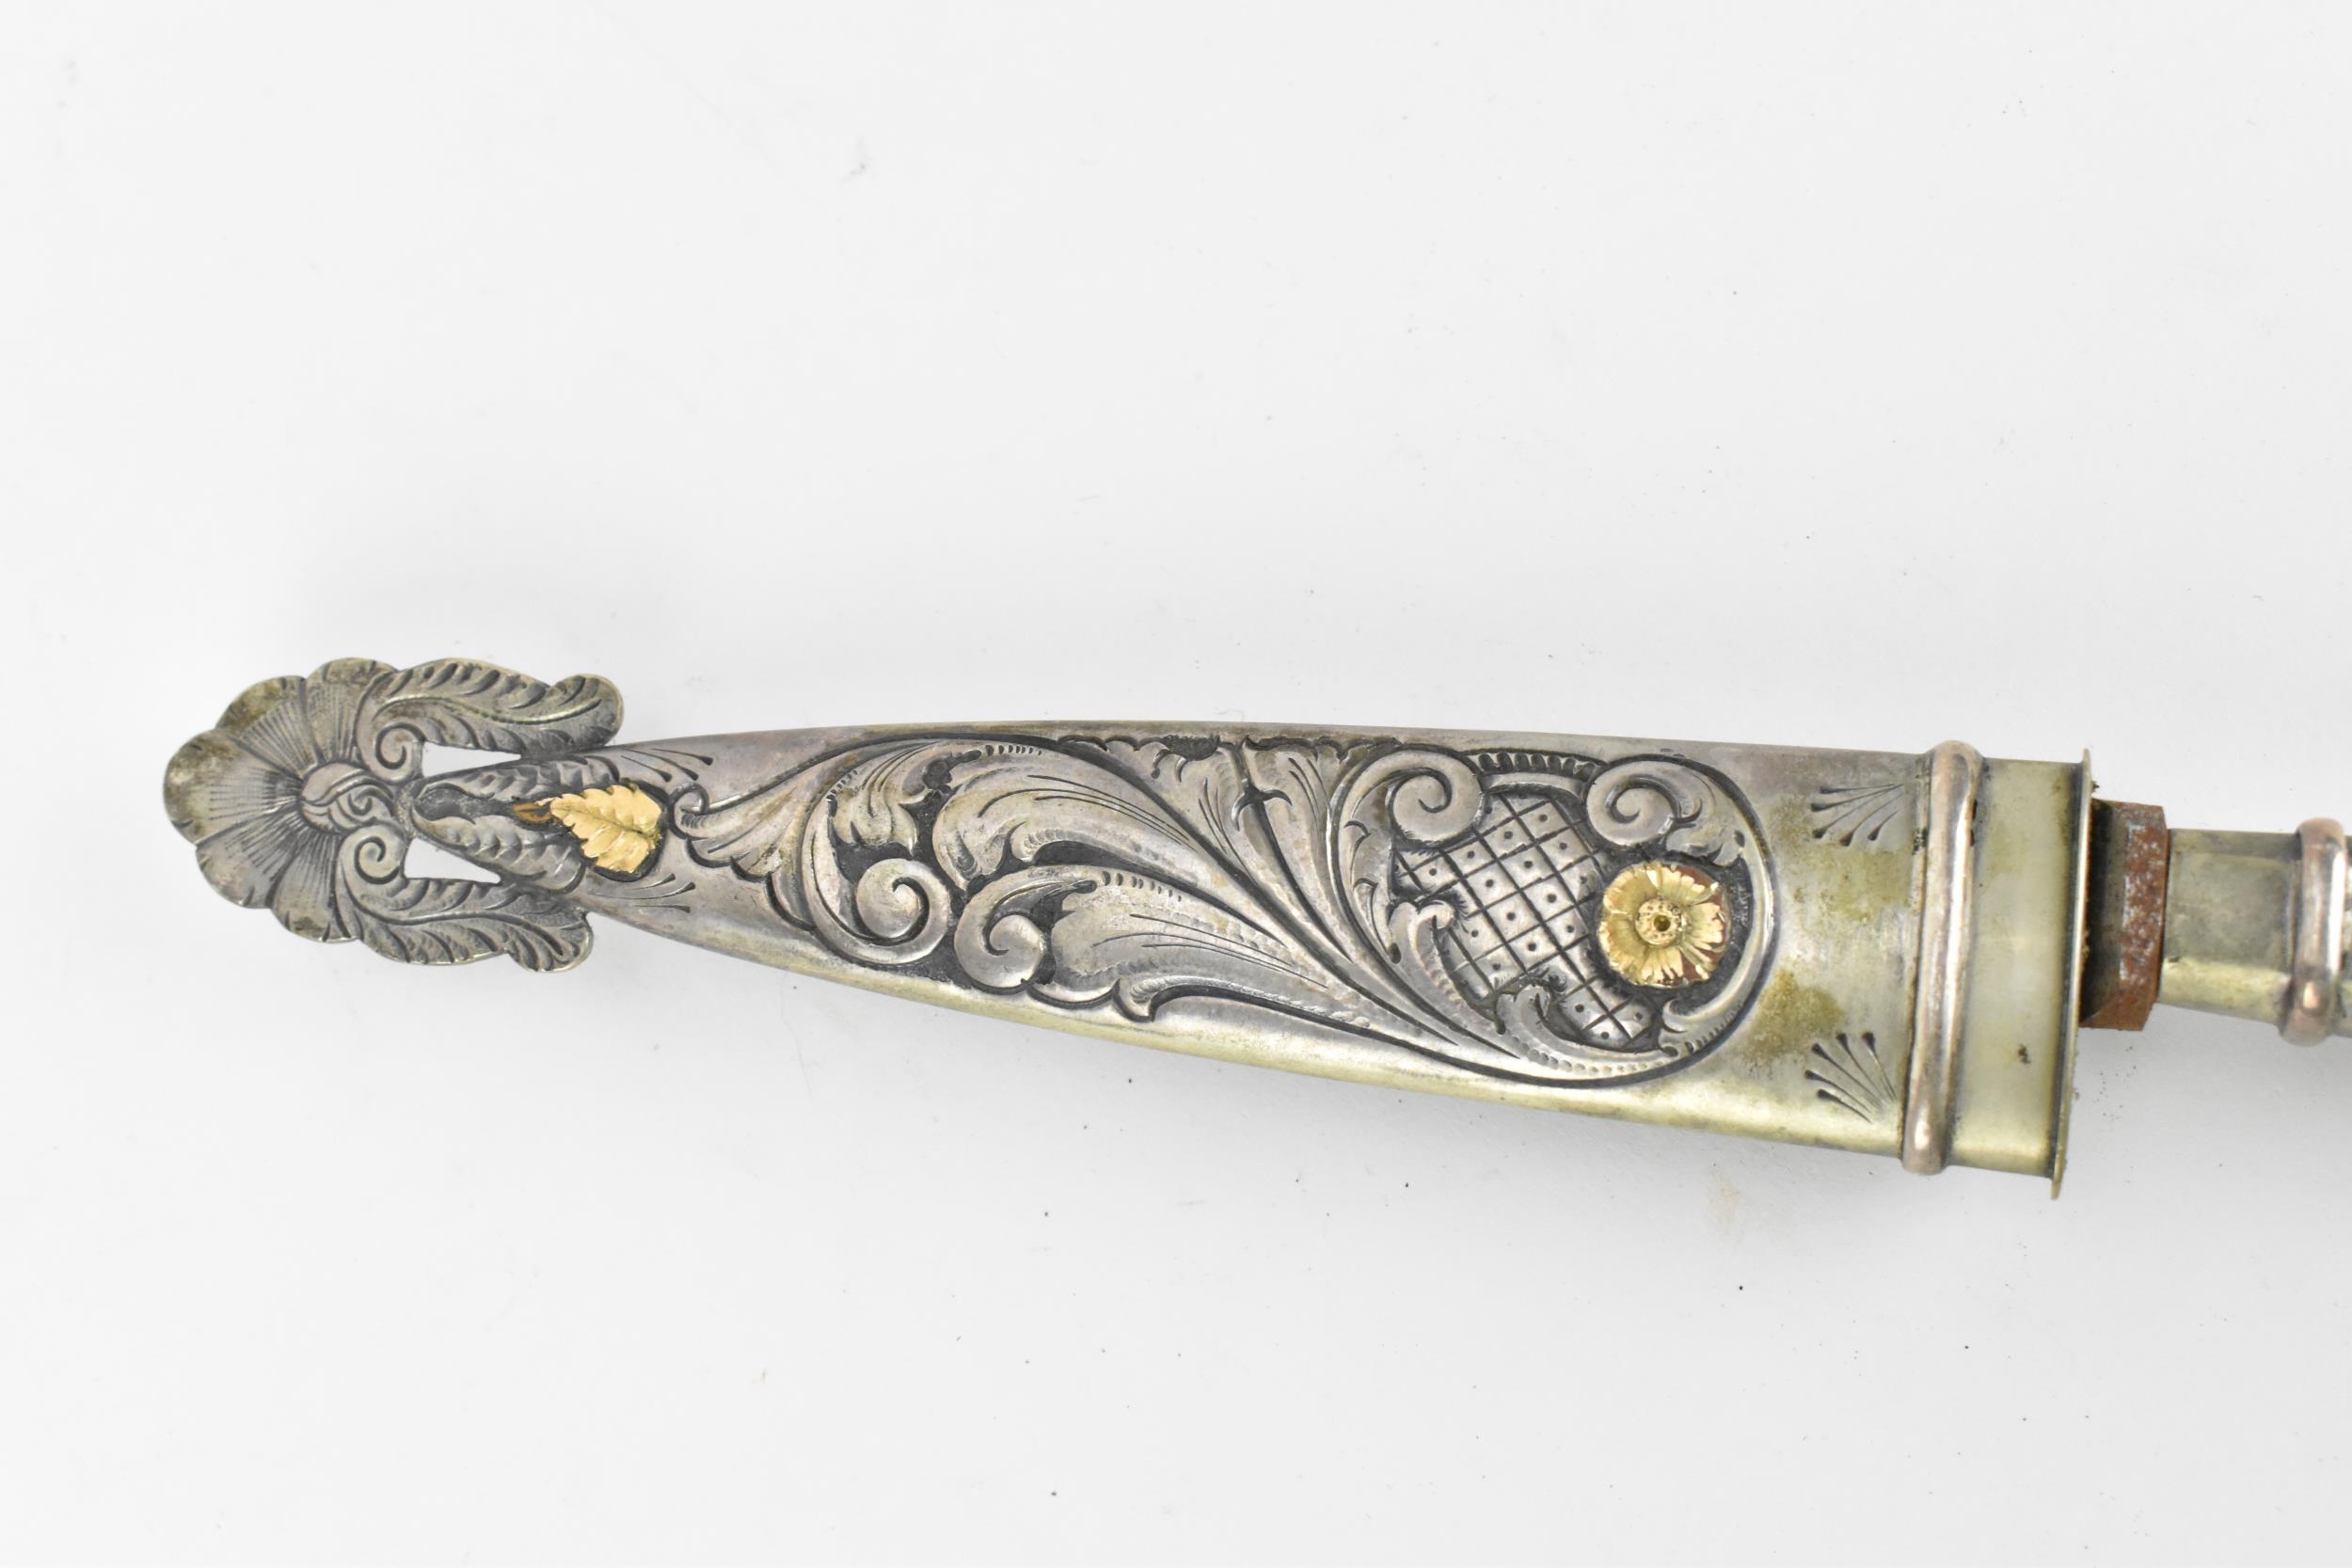 A German Heinr Boker and Co Soligen-Alemania Gaucho knife/dagger, with floral and acanthus etched - Image 6 of 6